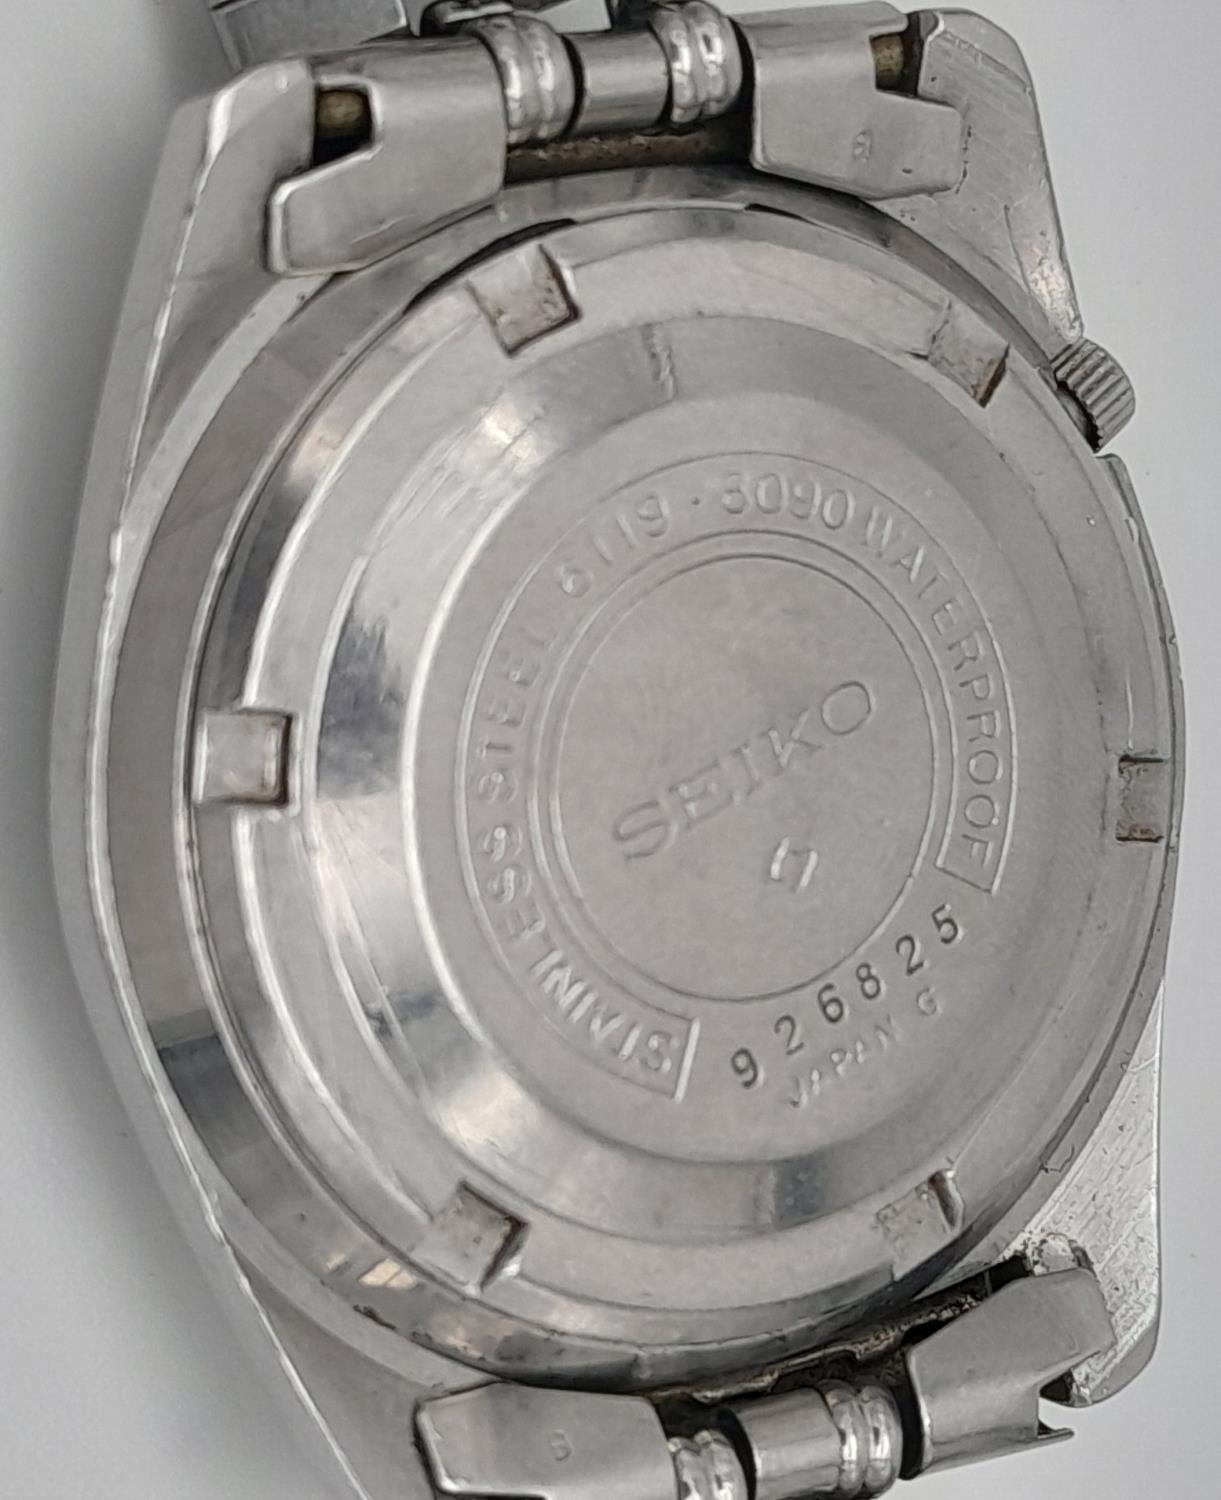 A Vintage Seiko 5 Automatic 21 Jewels Gents Watch. Stainless steel bracelet and case - 36mm. Black - Image 5 of 6